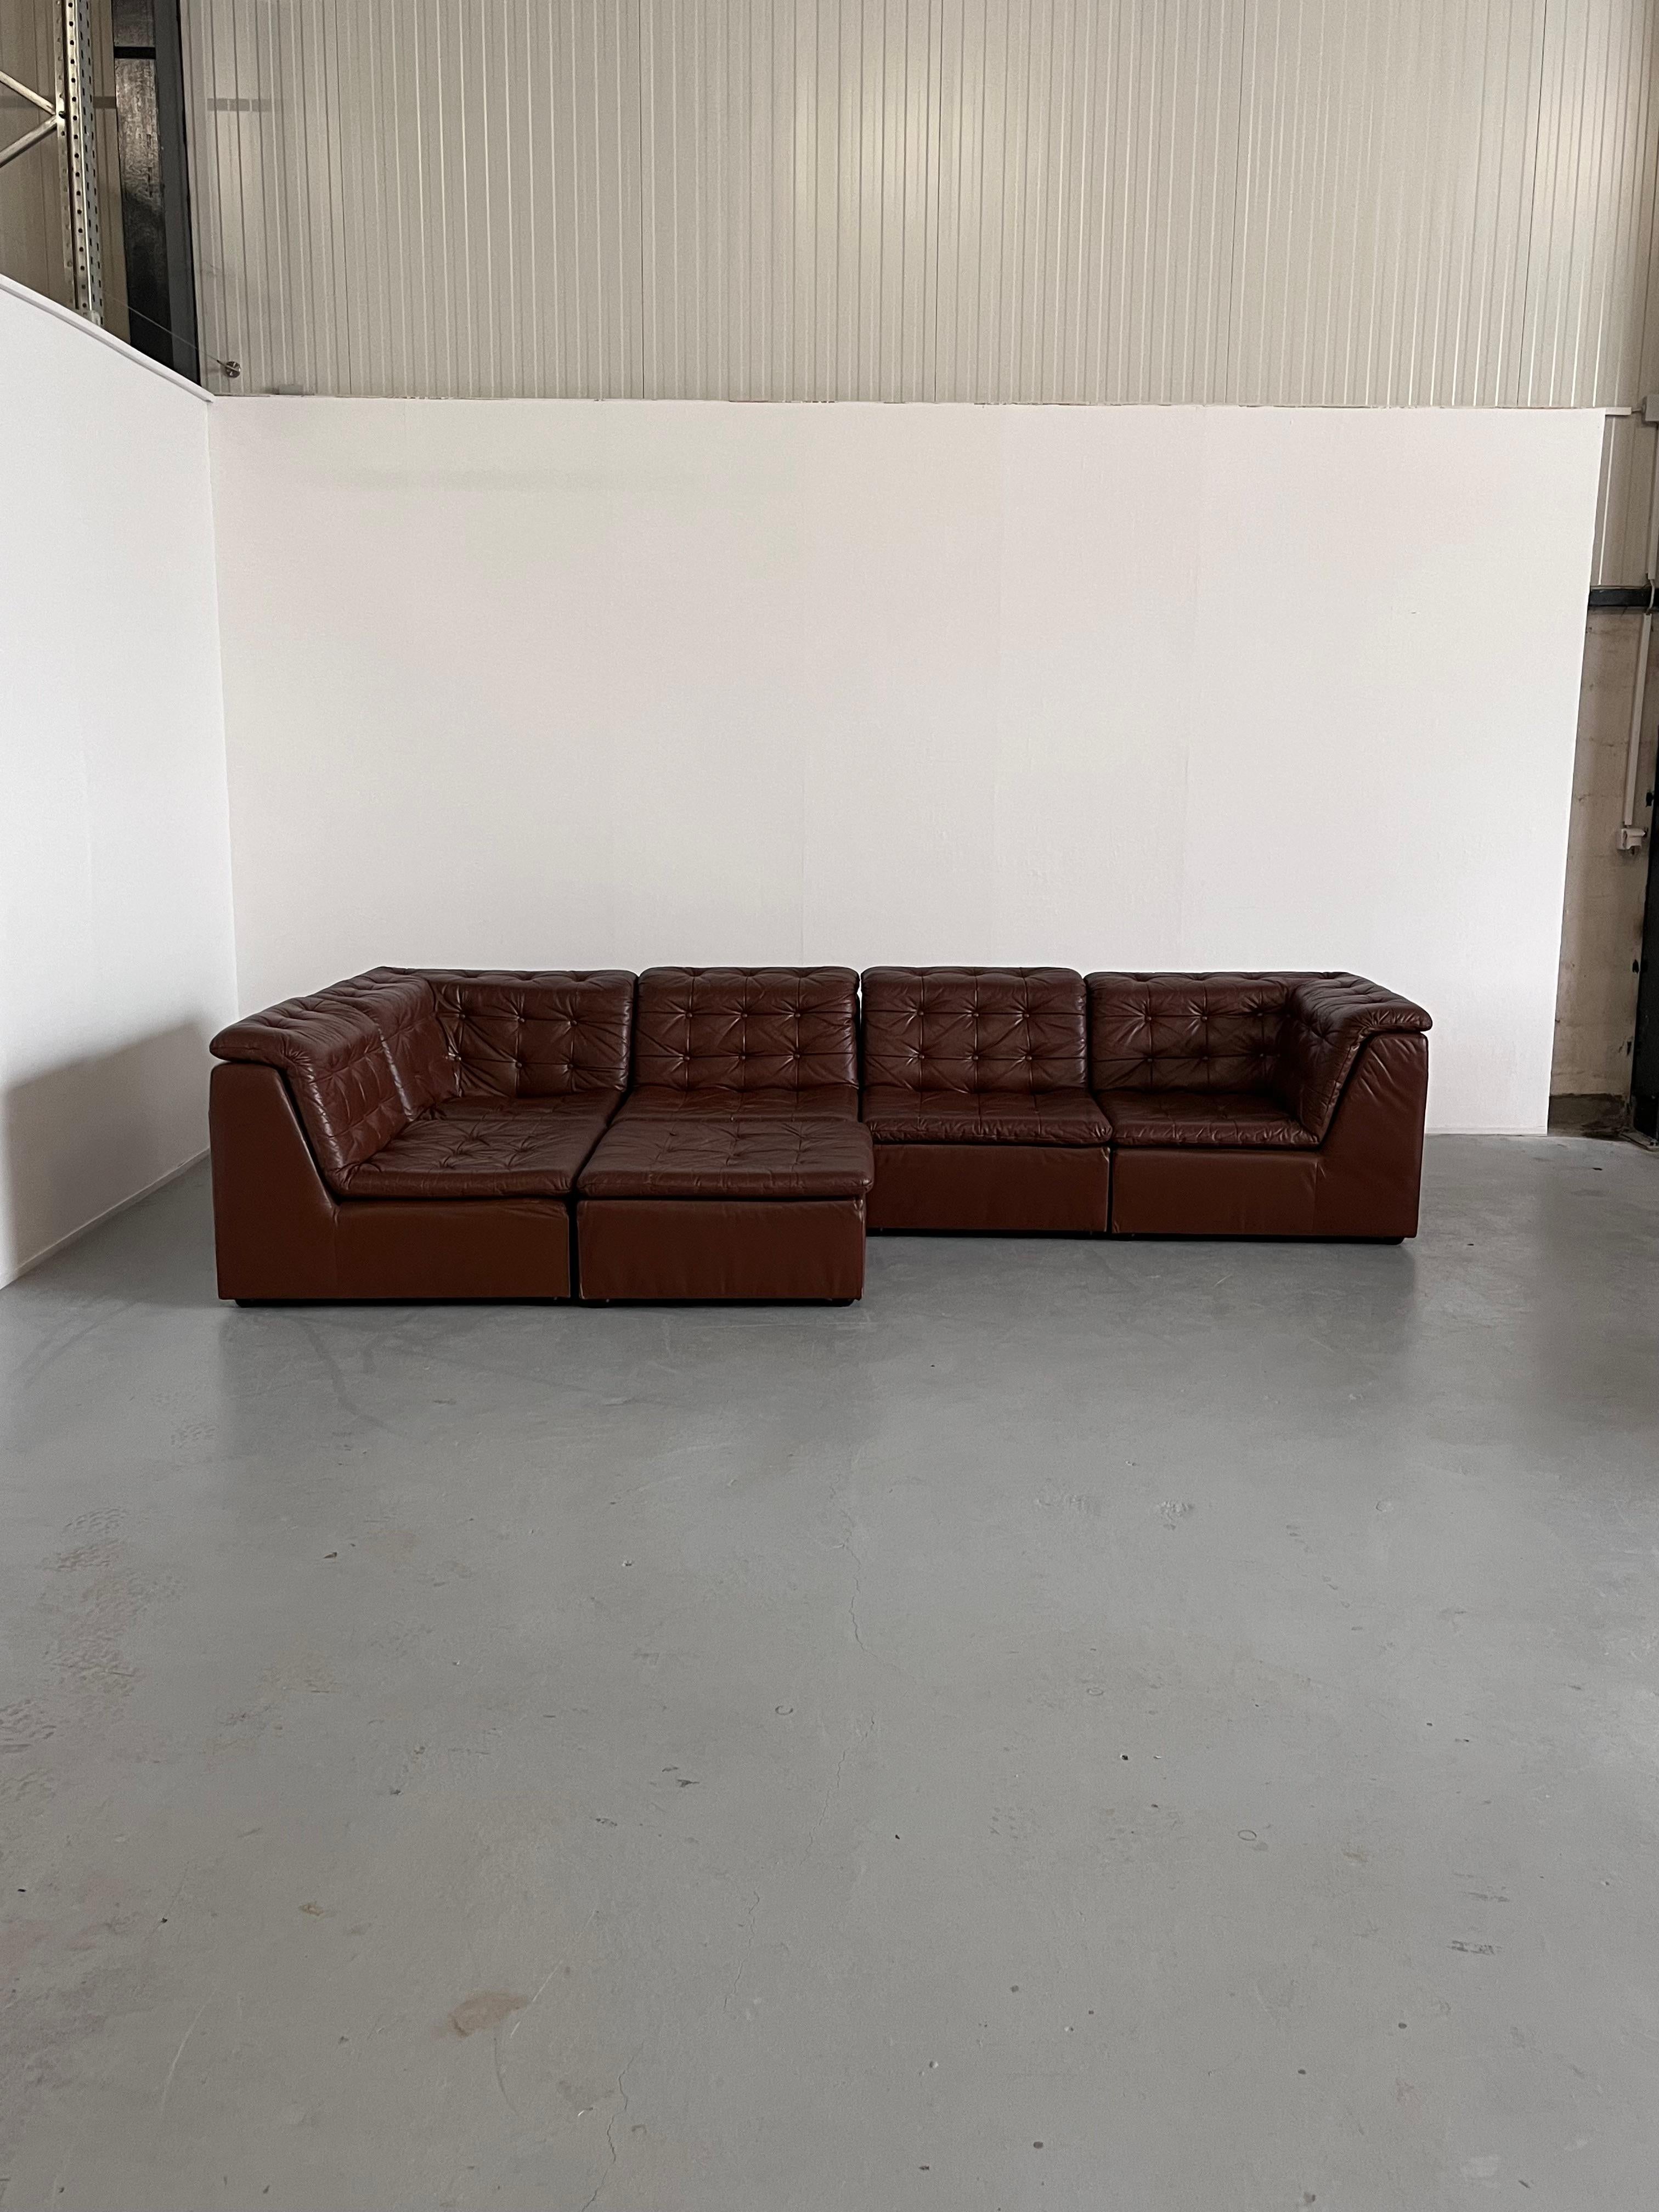 Vintage Patchwork Cognac Leather Six-Part Modular Sofa by Laauser, 1970s Germany For Sale 3